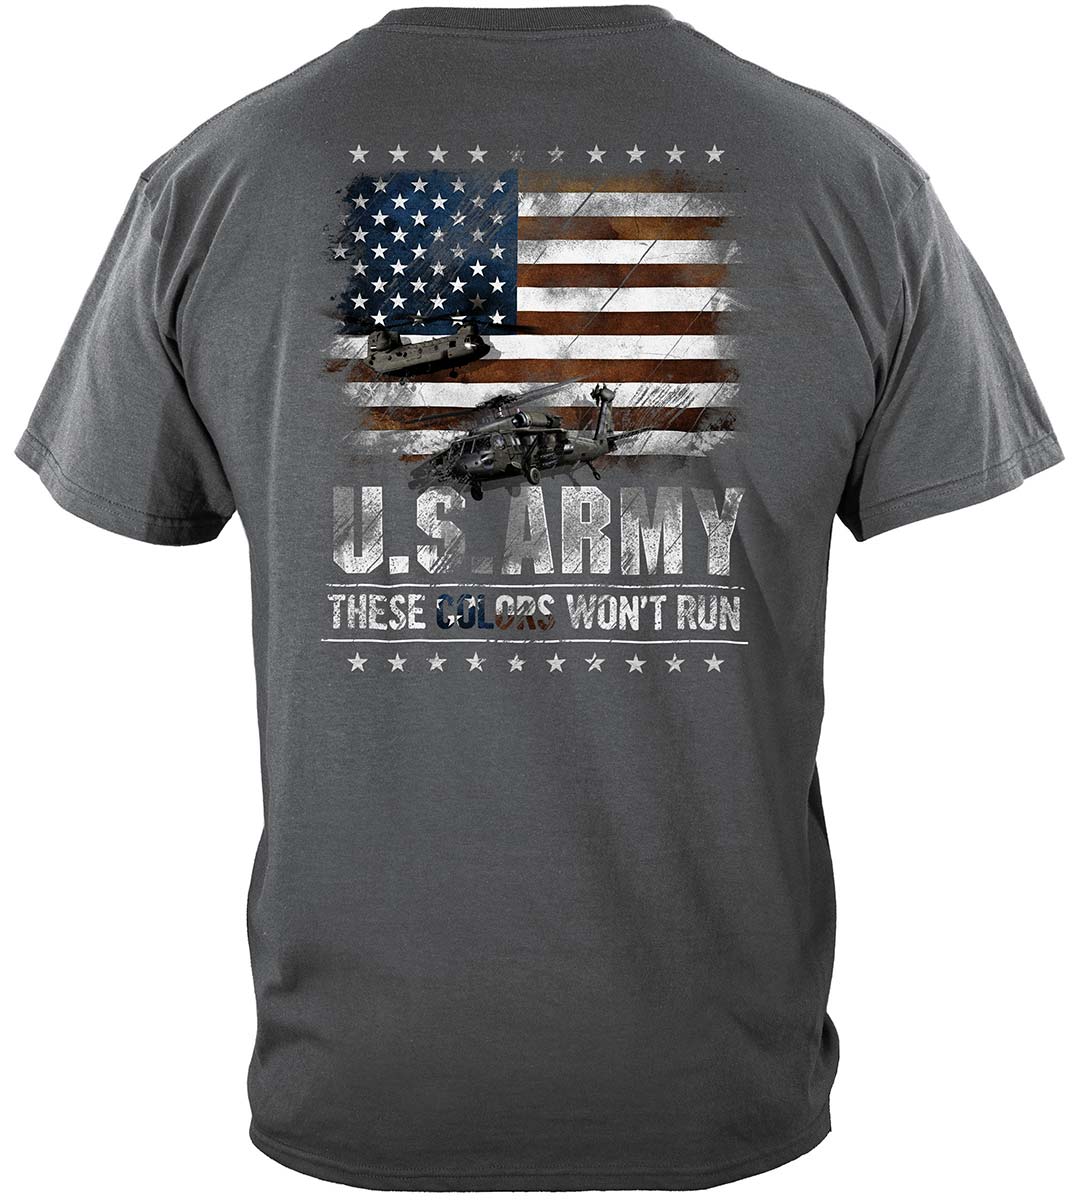 Army These Color Don't Run Premium T-Shirt